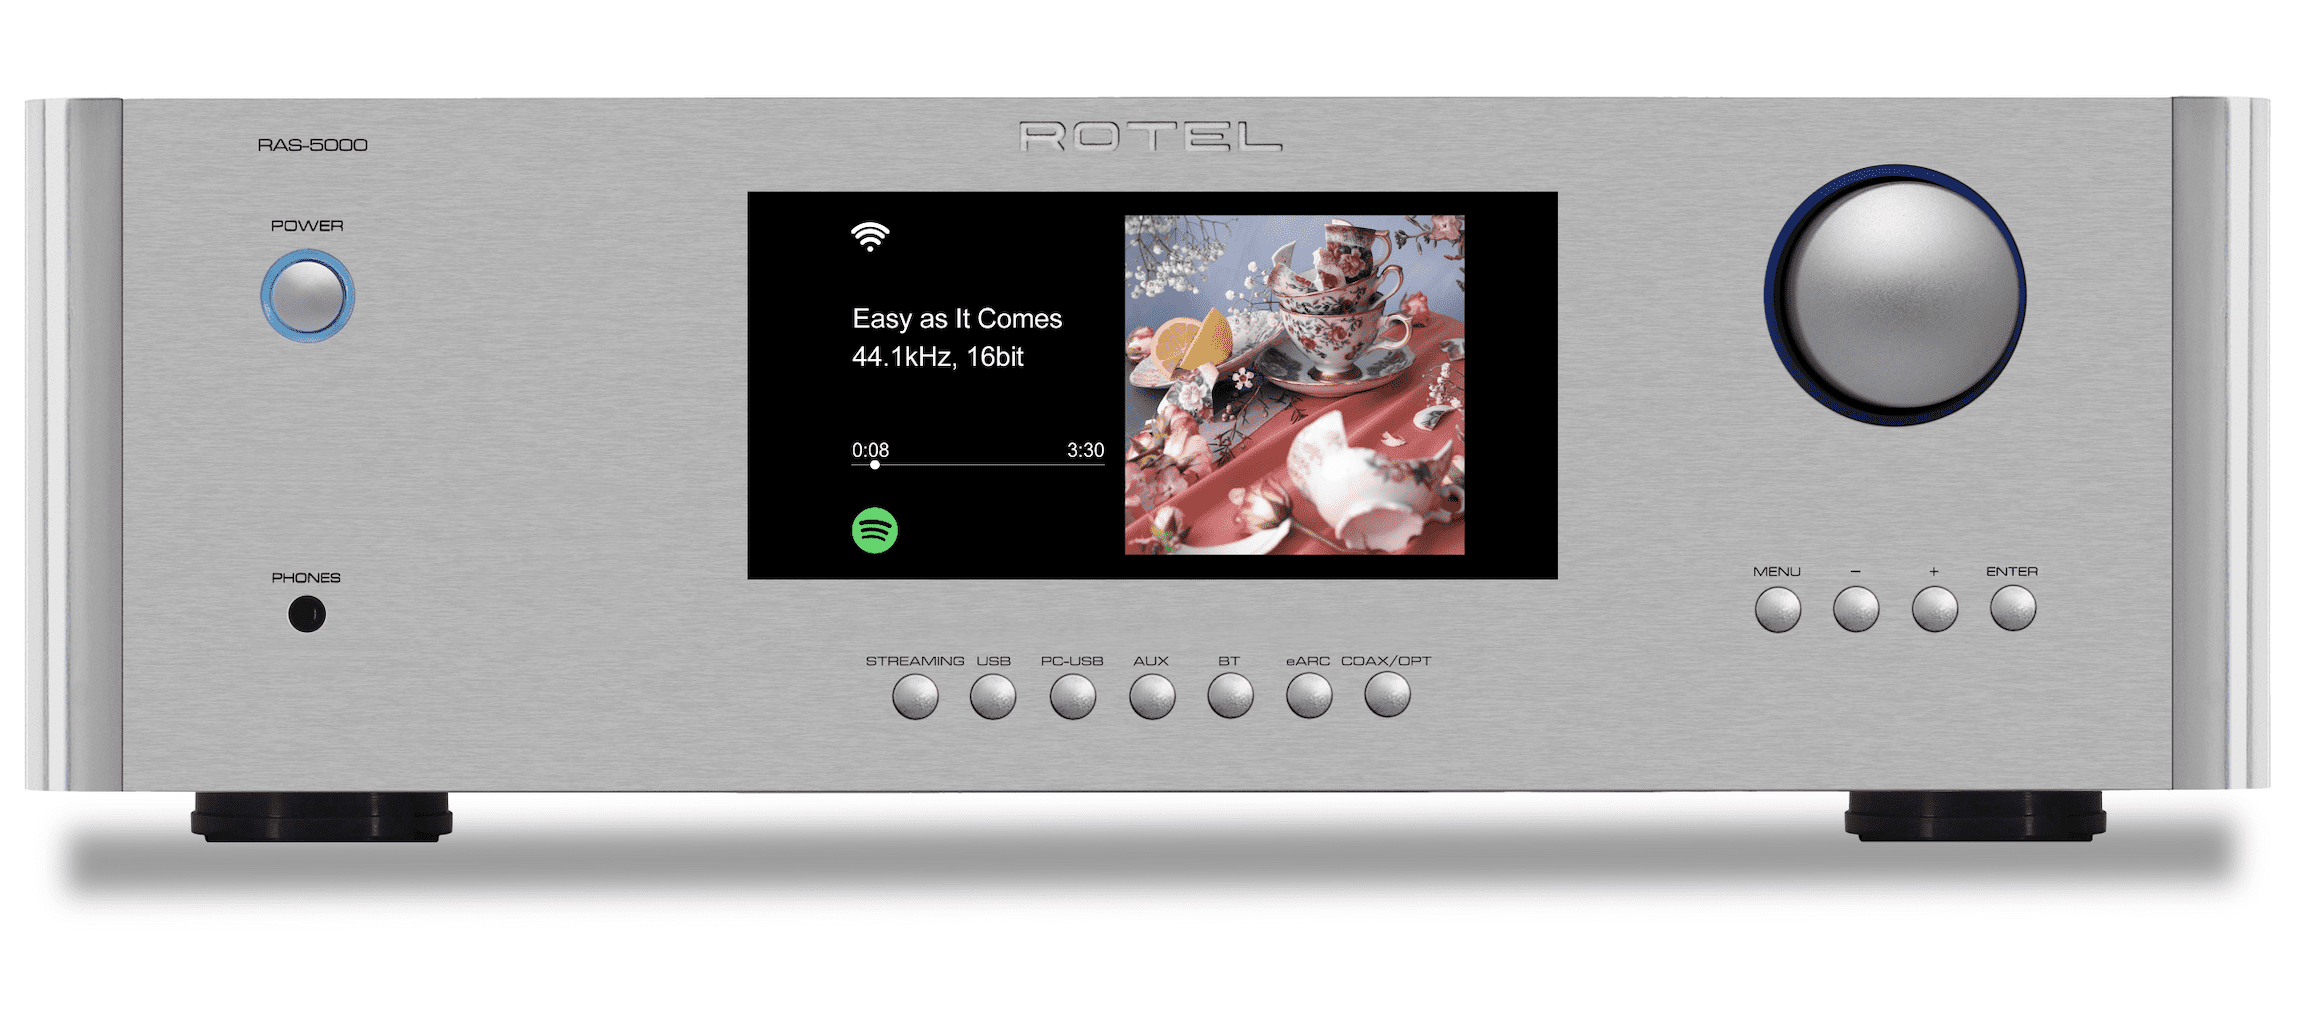 The new Rotel RAS-5000 Stereo Integrated Amplifier with comprehensive built-in streaming functions and HDMI-ARC connectivity